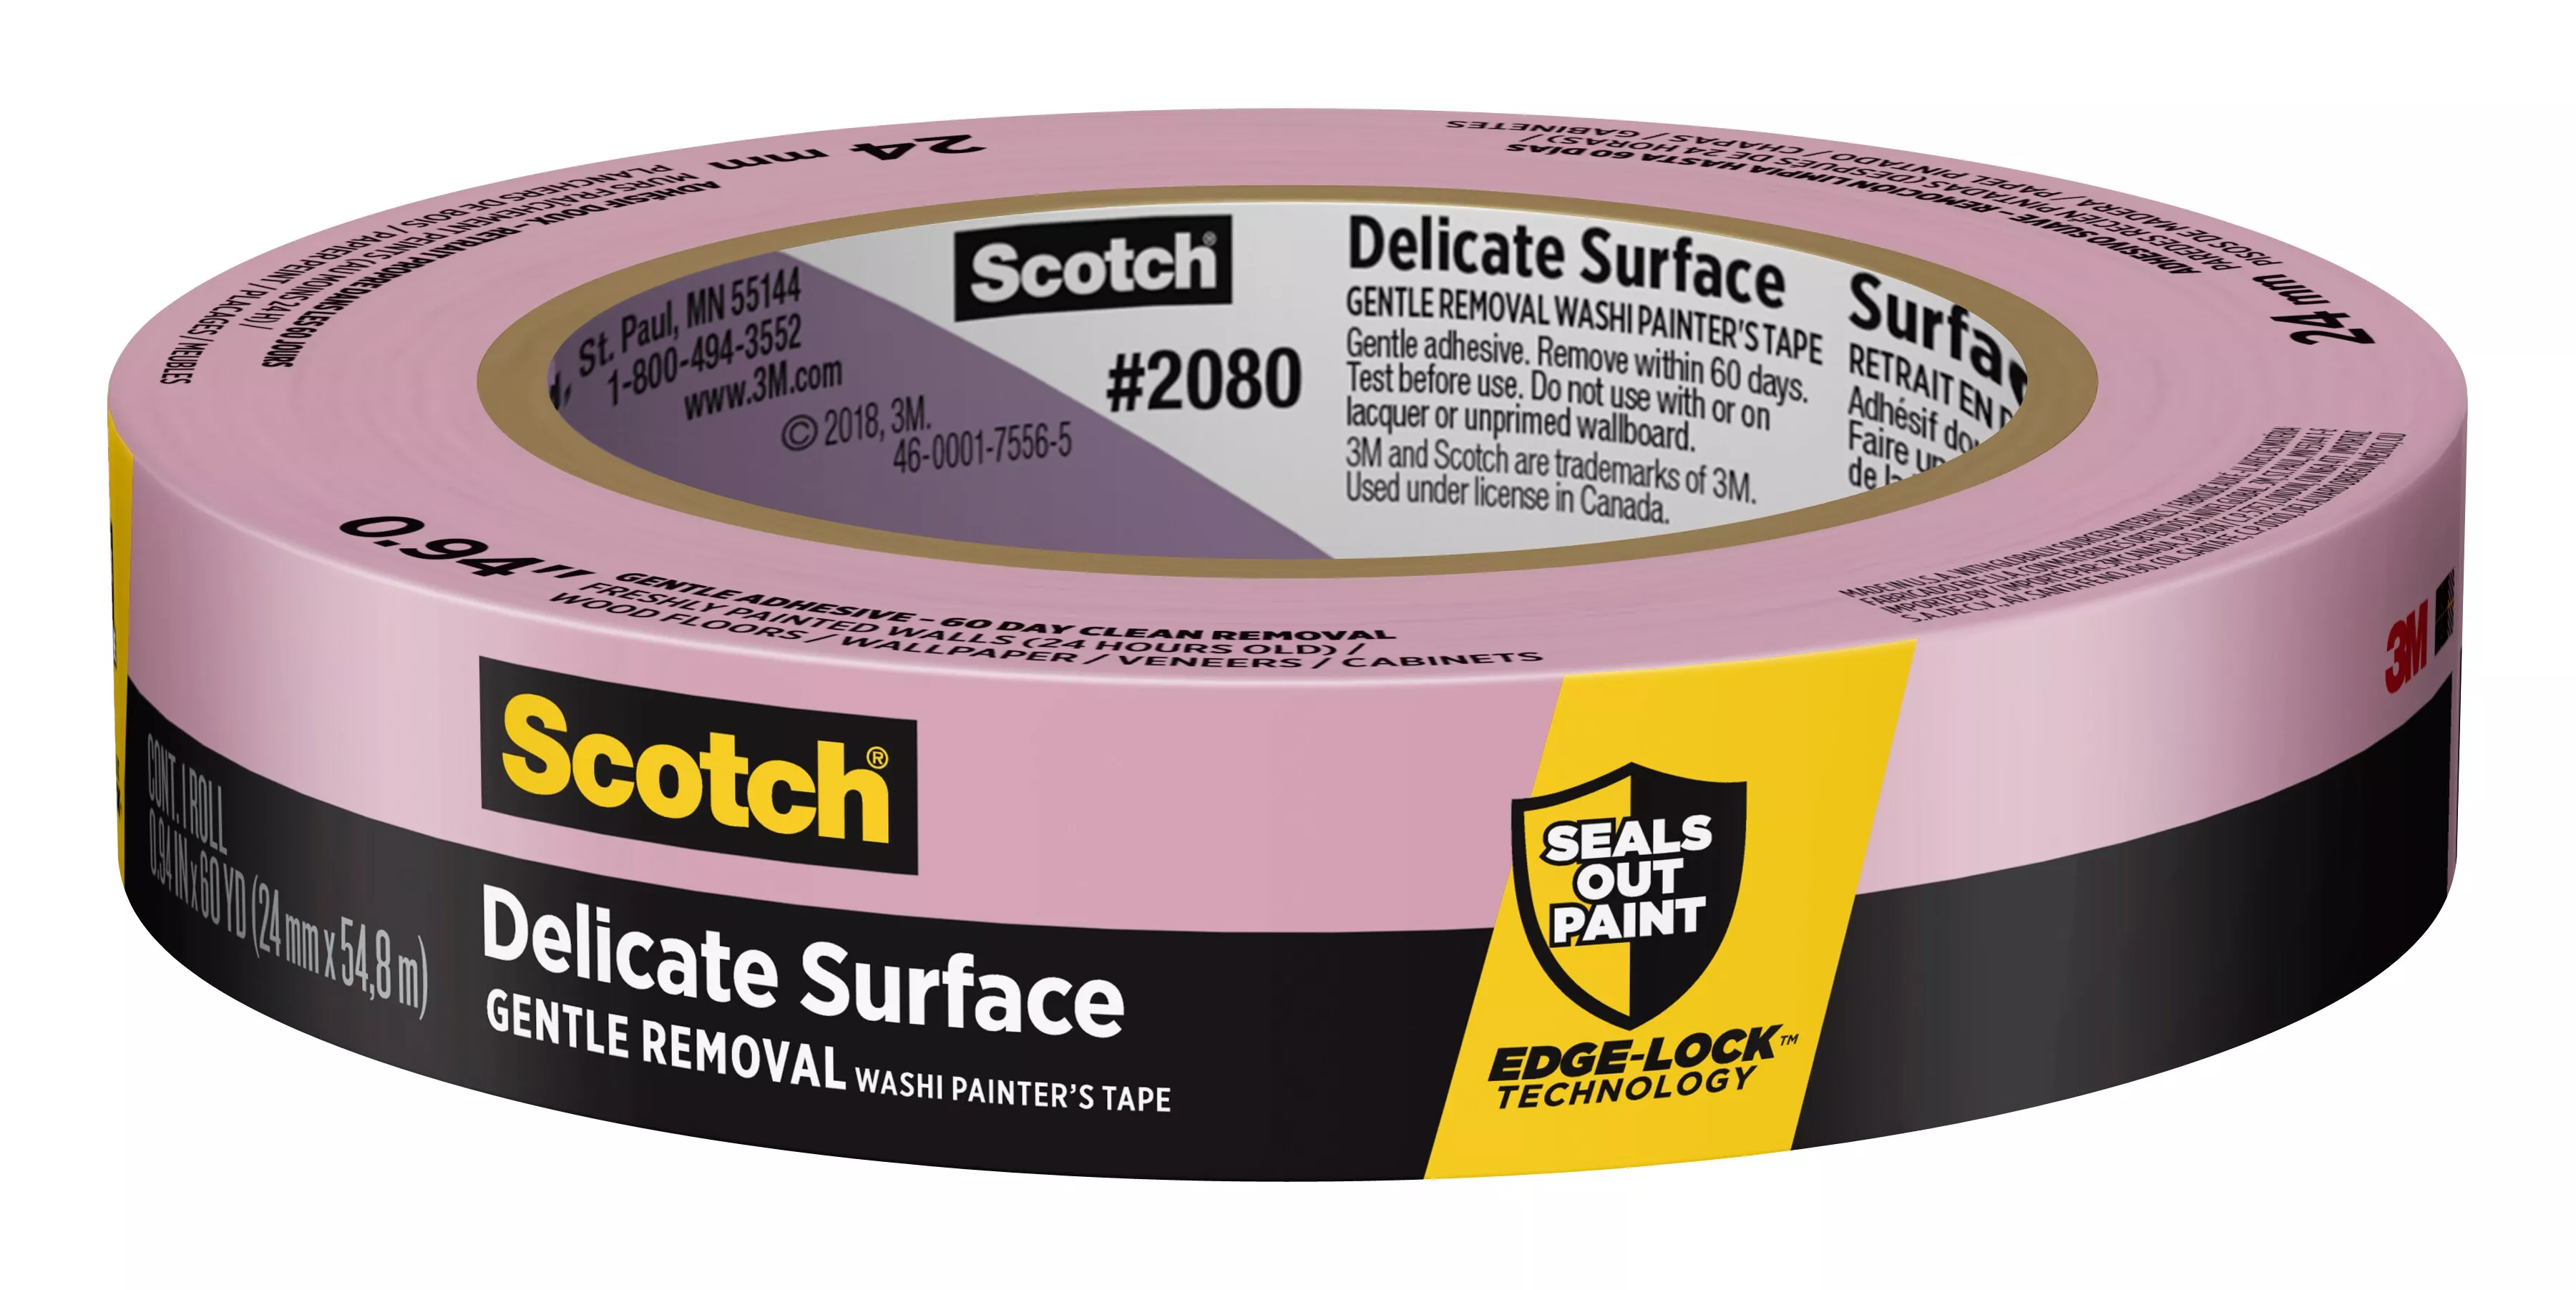 Scotch® Delicate Surface Painter's Tape 2080-24EC, 0.94 in x 60 yd (24mm
x 54,8m)